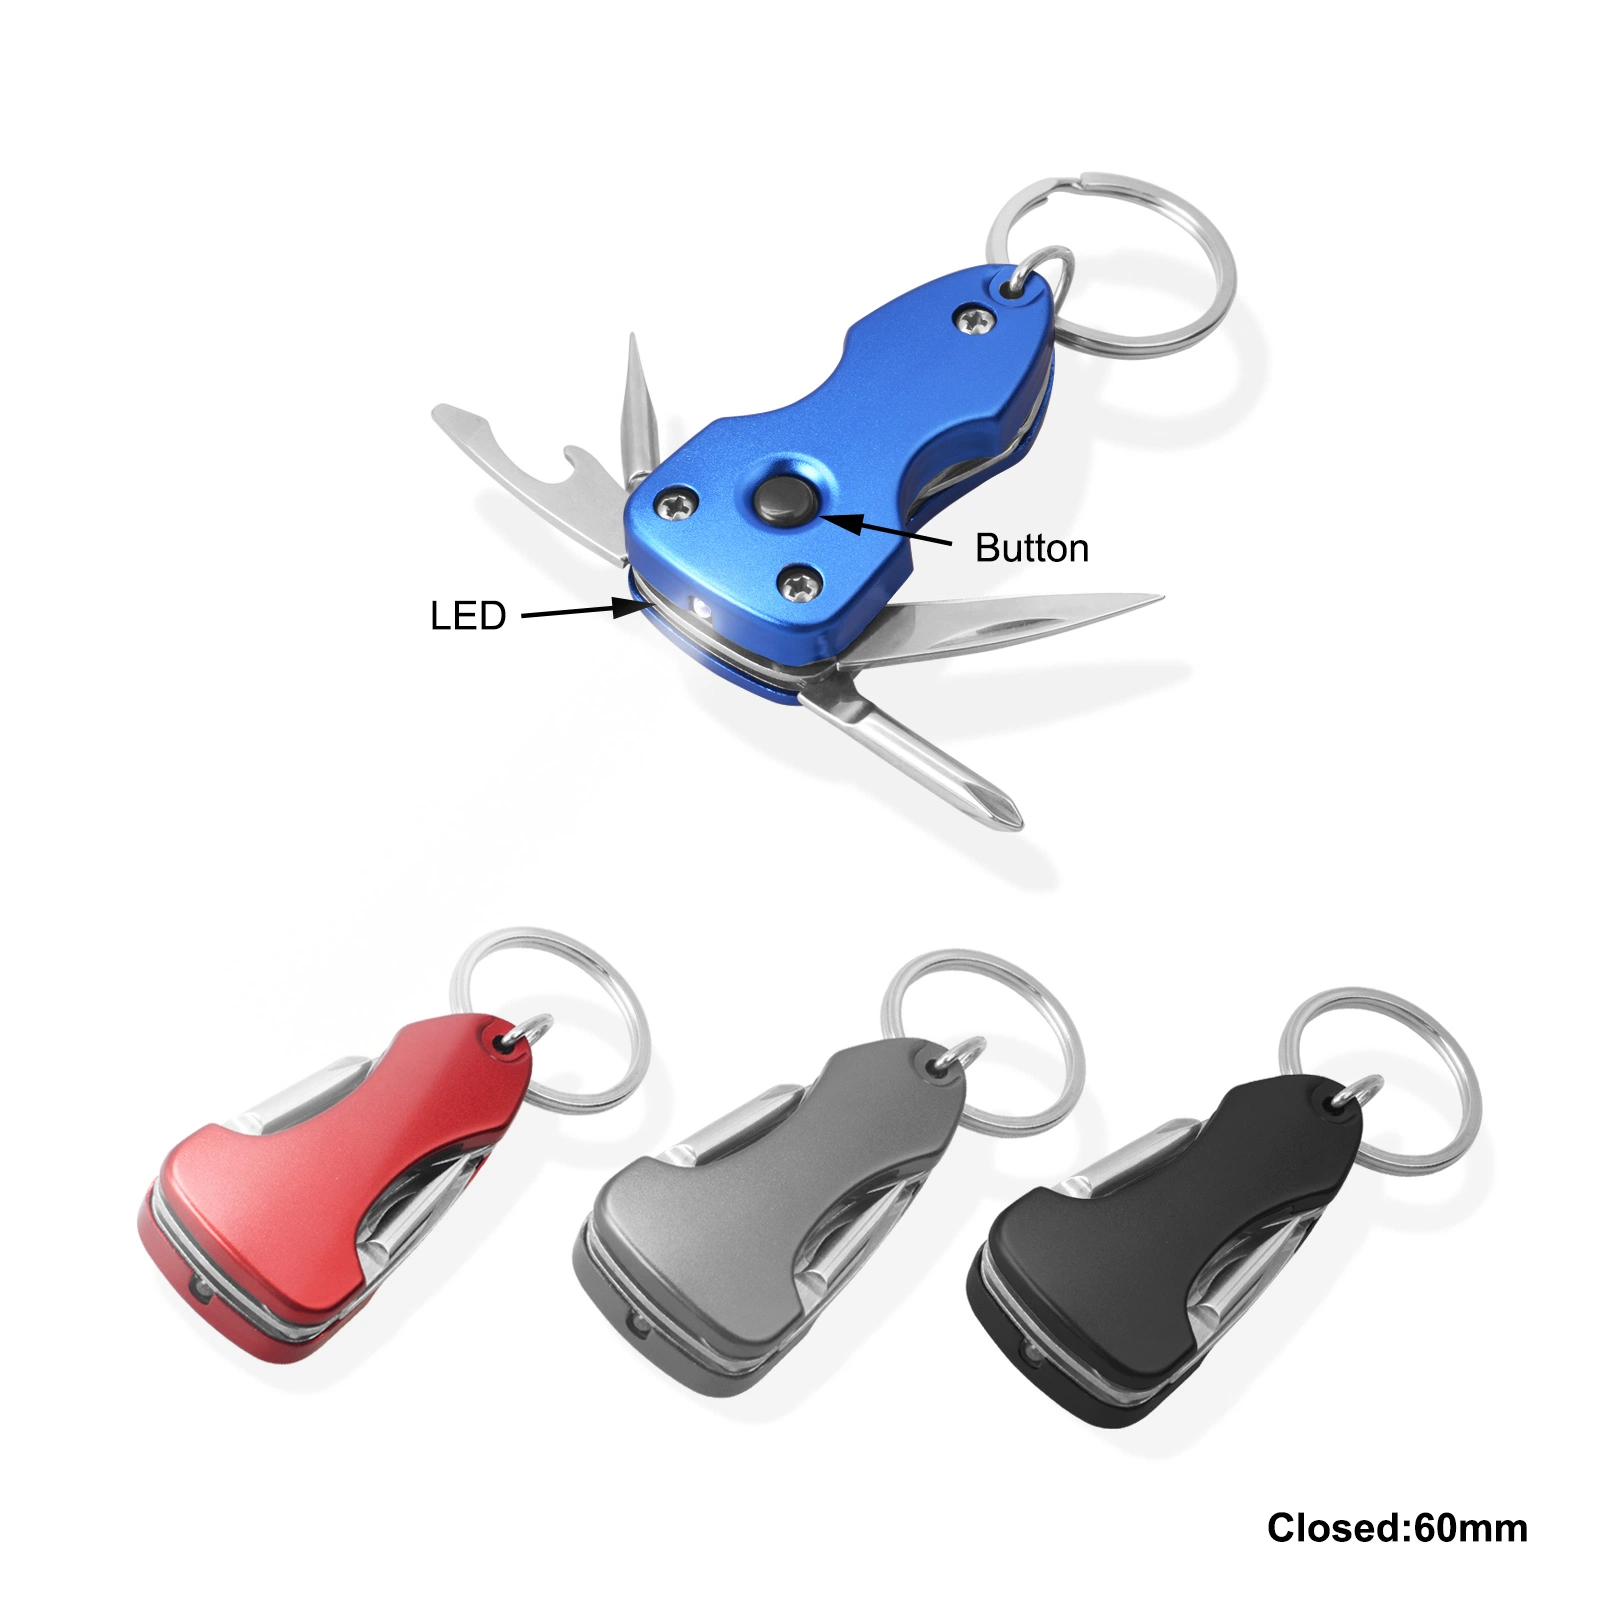 Multi Function Key Chain Tools with LED Torch (#668-LED)